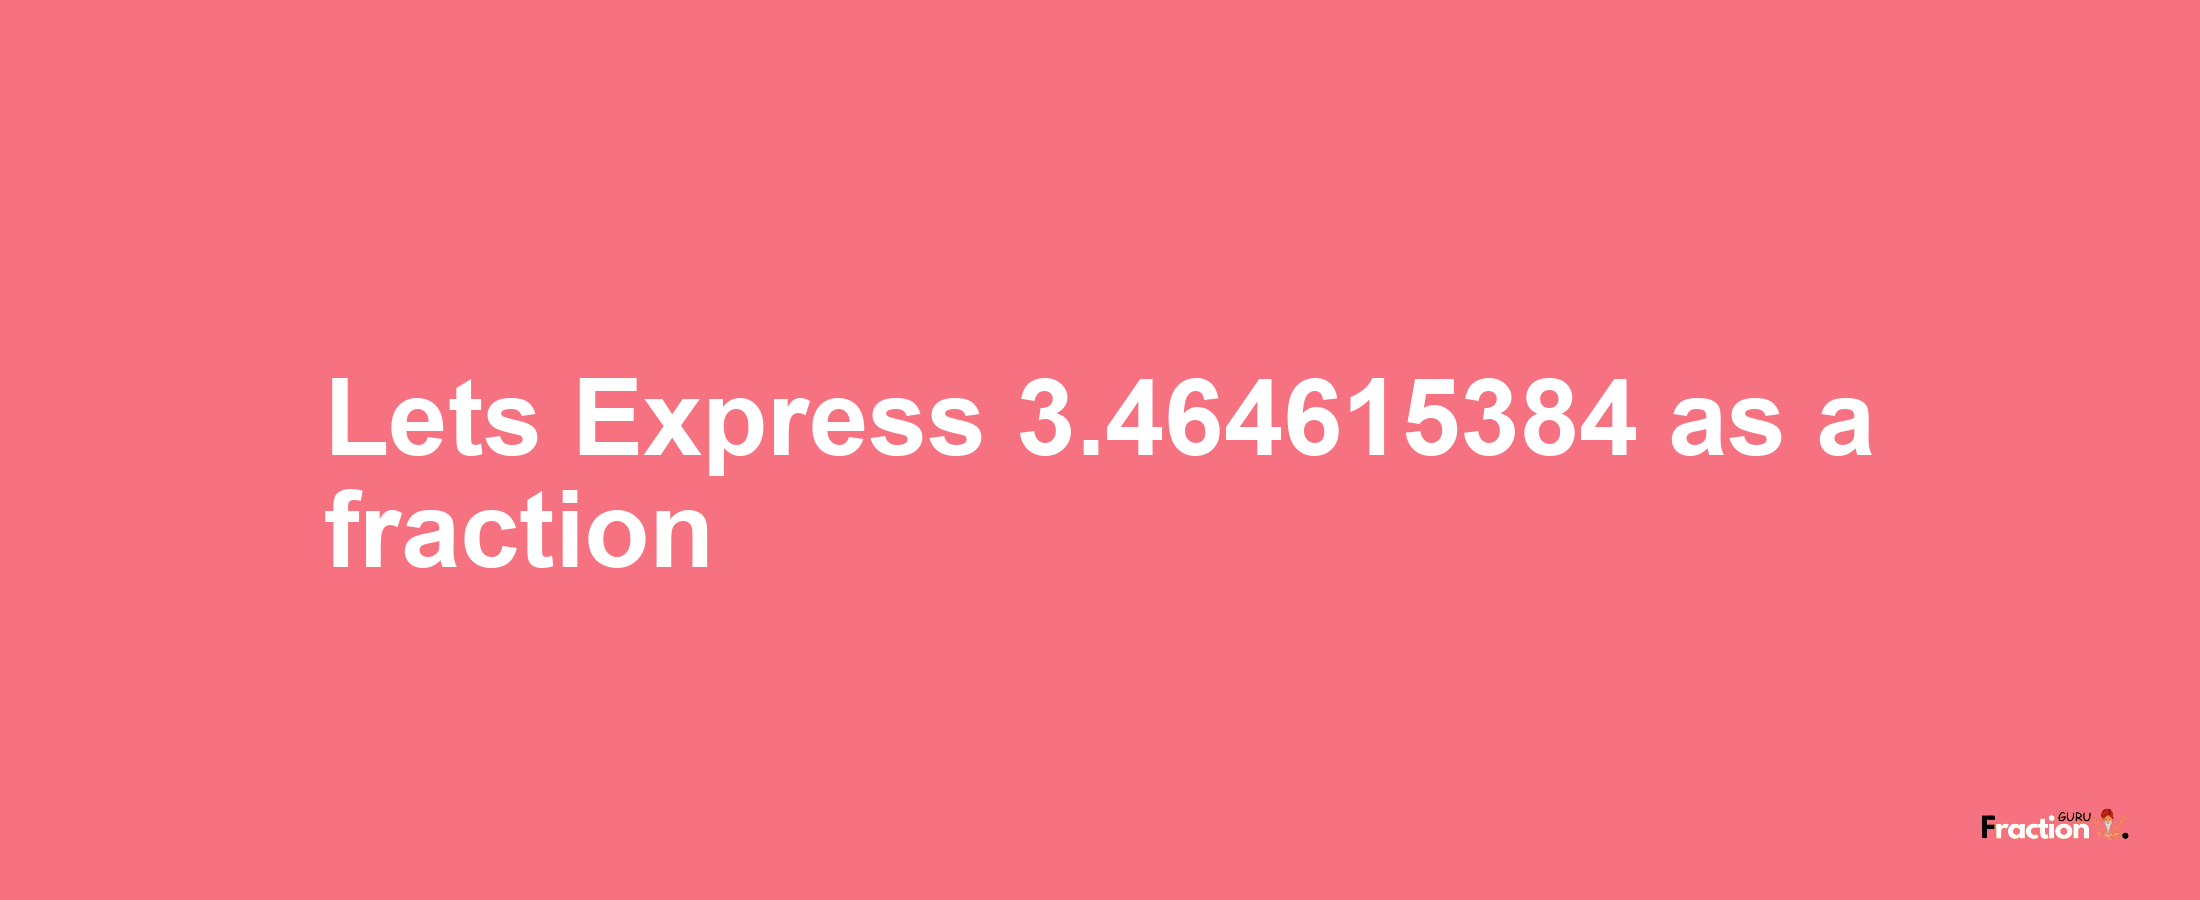 Lets Express 3.464615384 as afraction